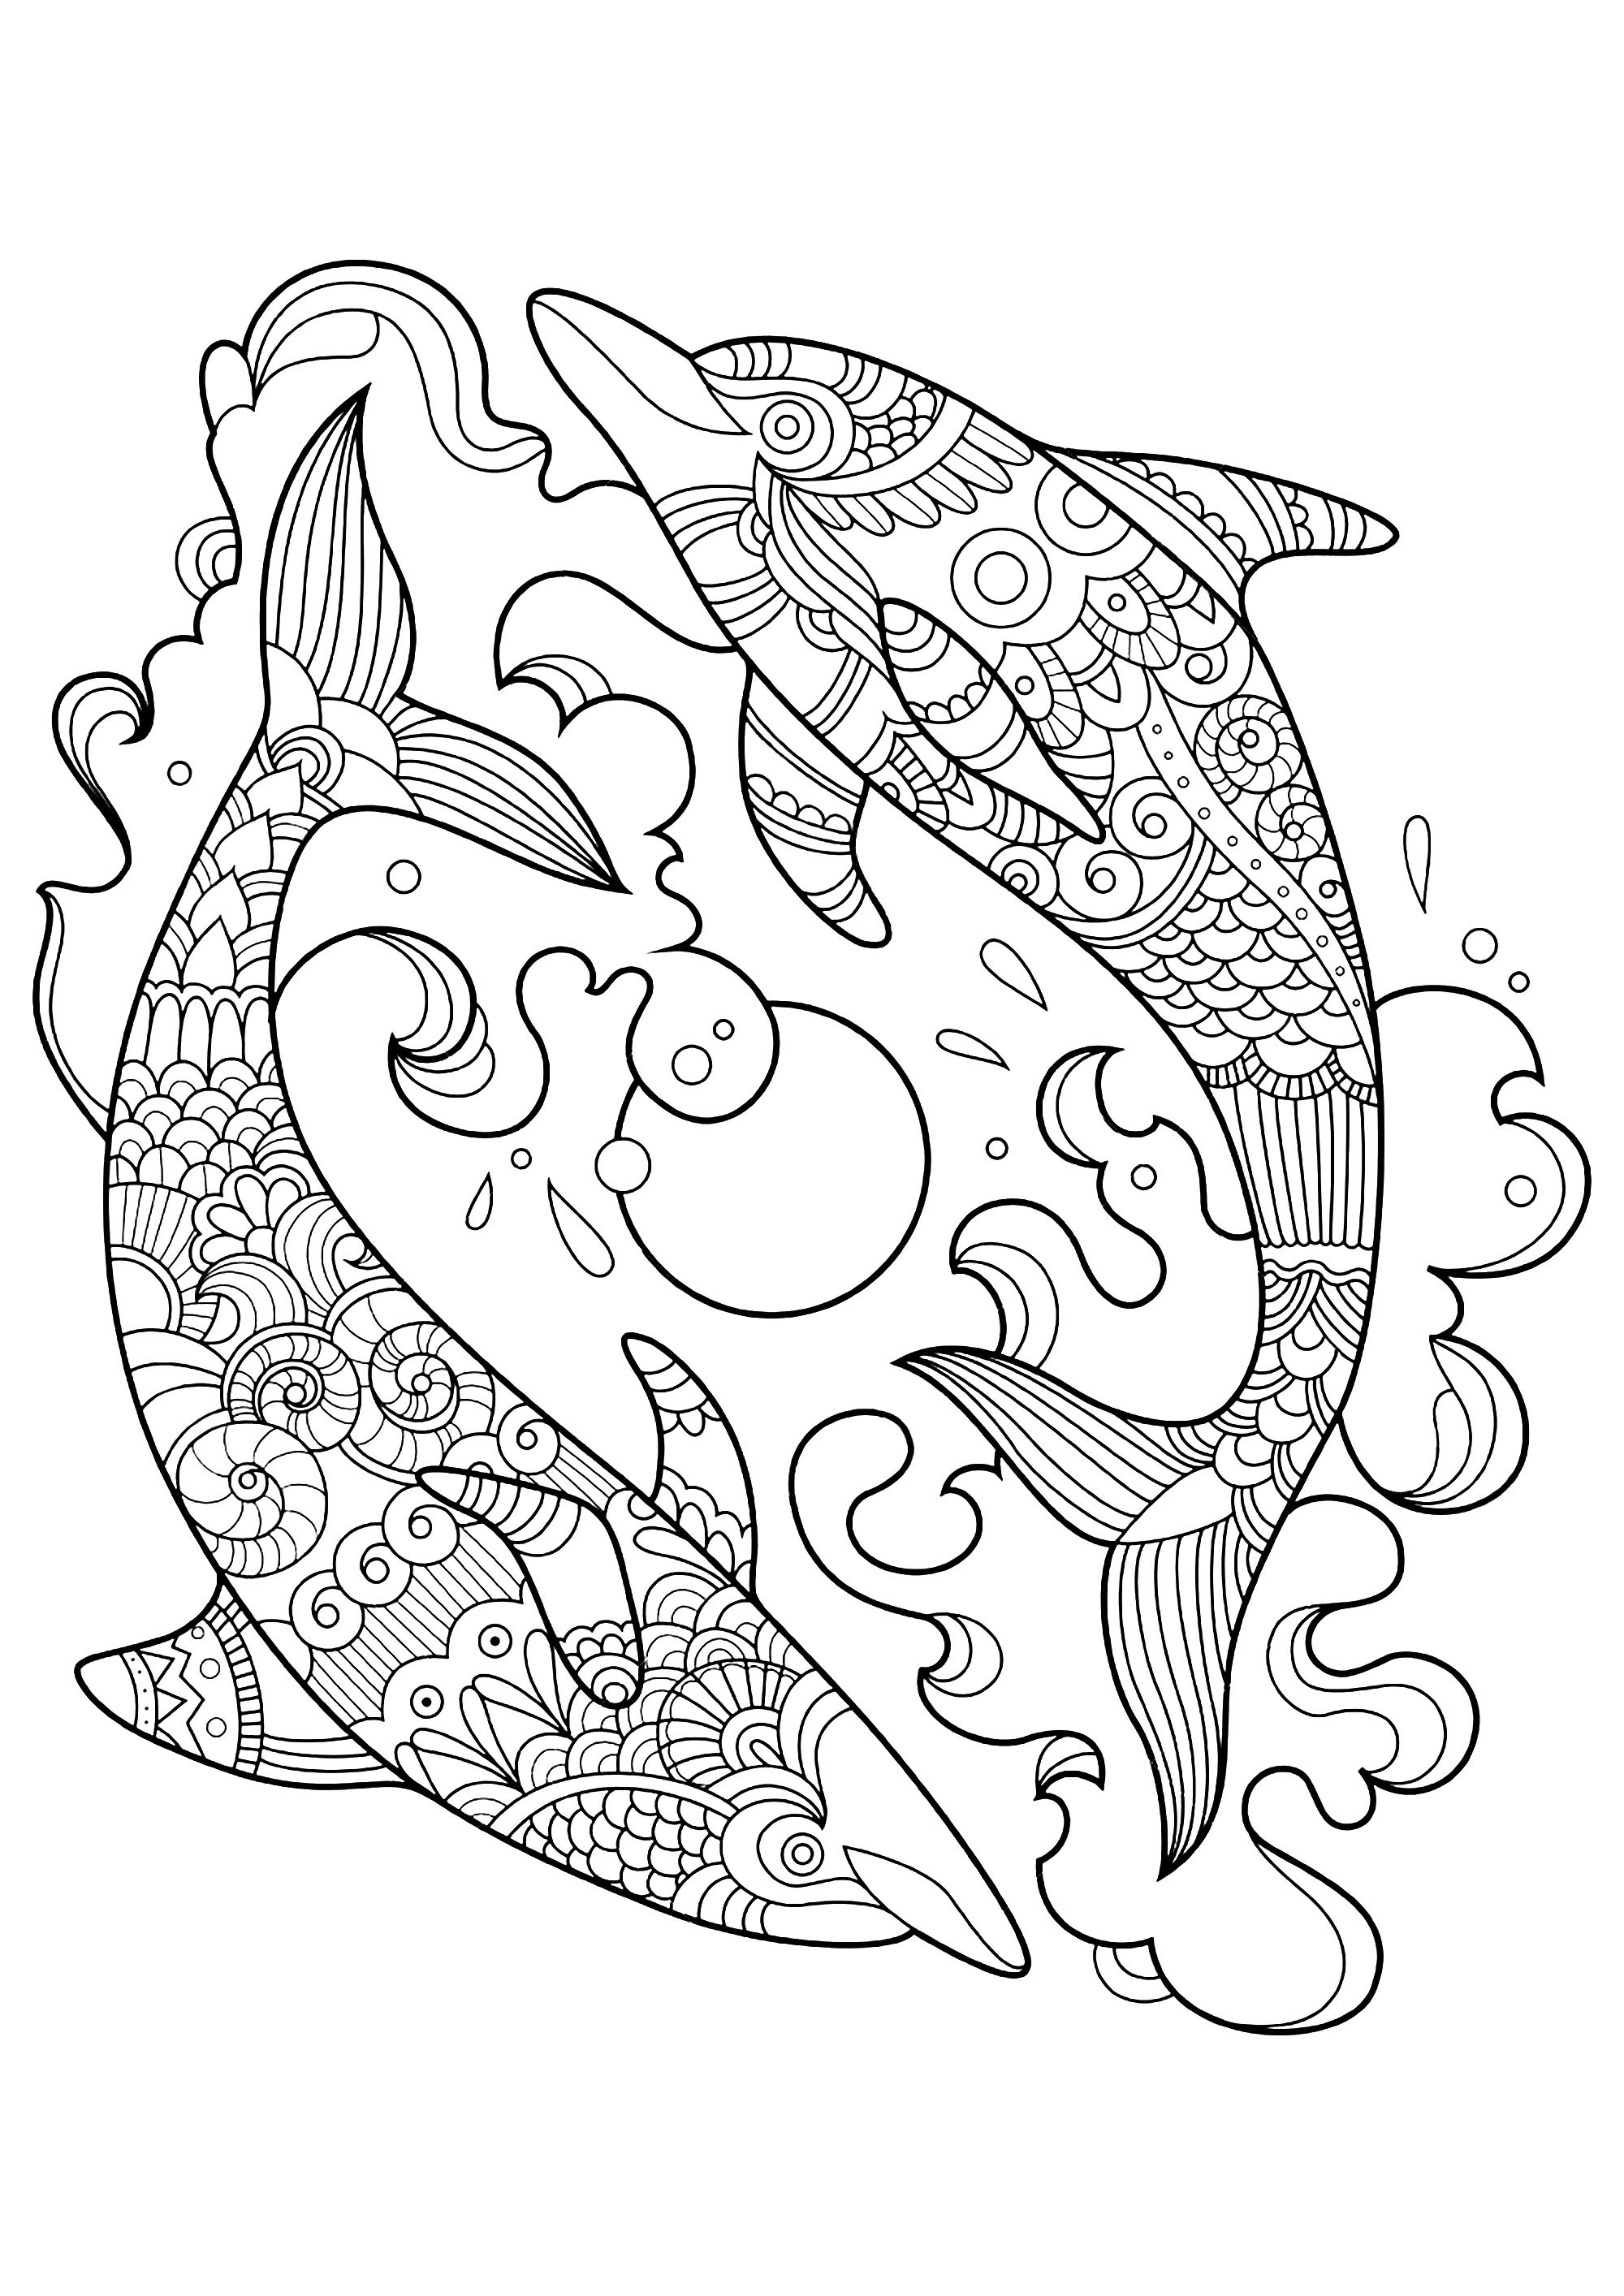 dolphins-to-color-for-children-dolphins-kids-coloring-pages